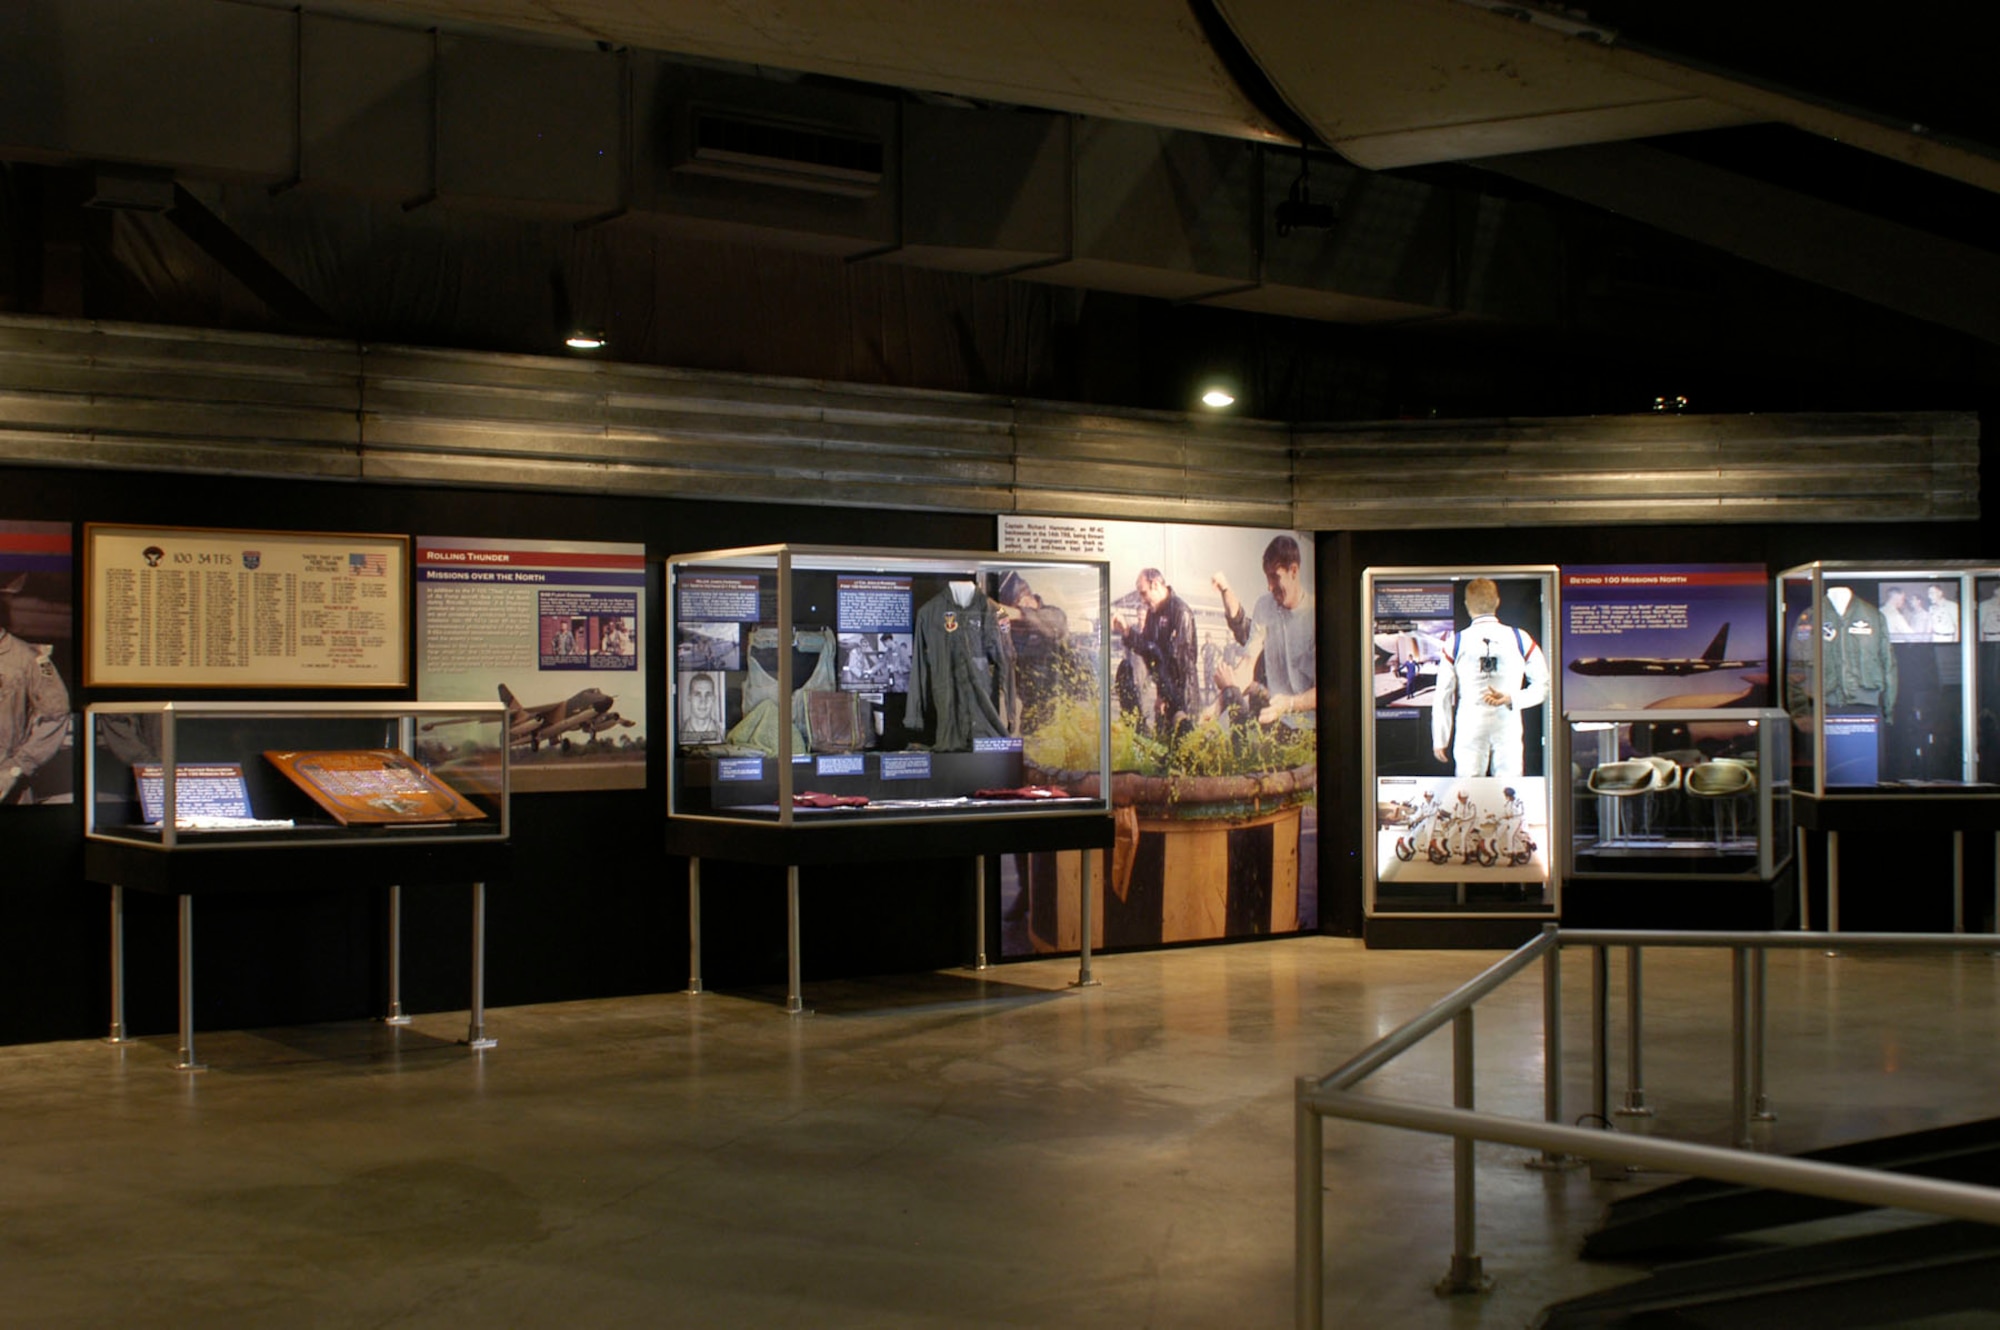 DAYTON, Ohio - A portion of the Badge of Honor: 100 Missions Up North exhibit in the Southeast Asia War Gallery at the National Museum of the U.S. Air Force. (U.S. Air Force photo)